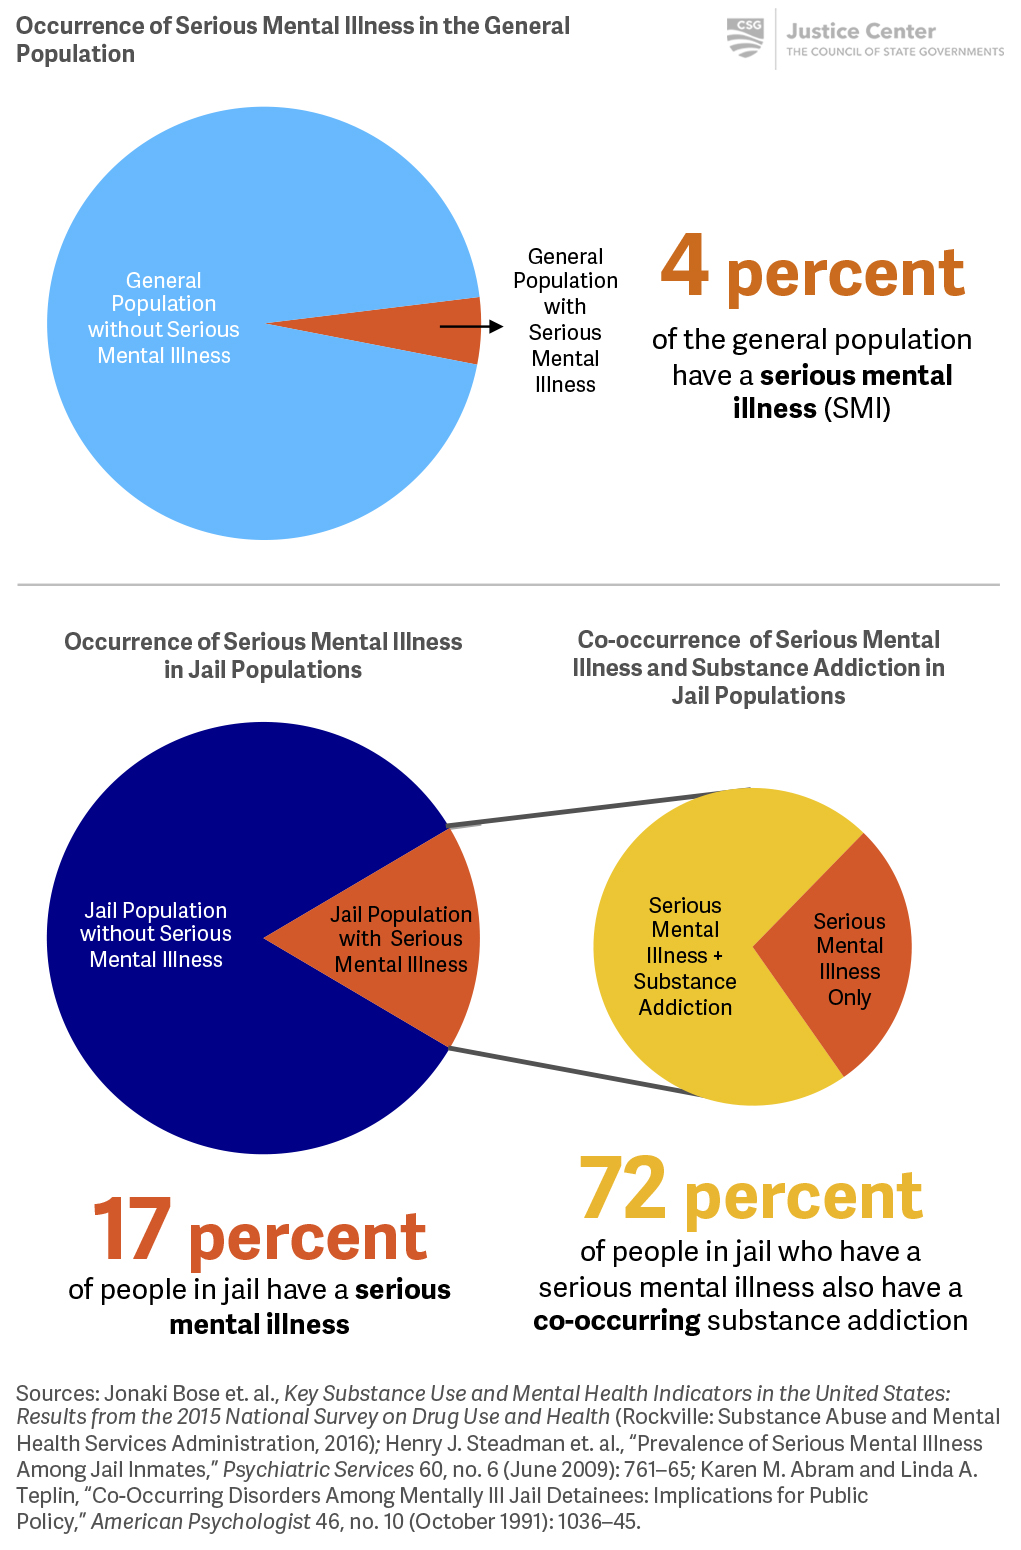 > While the proportion of people in jail who have a serious mental illness is greater than for the general public, few jurisdictions know how many people in jail have behavioral health needs.